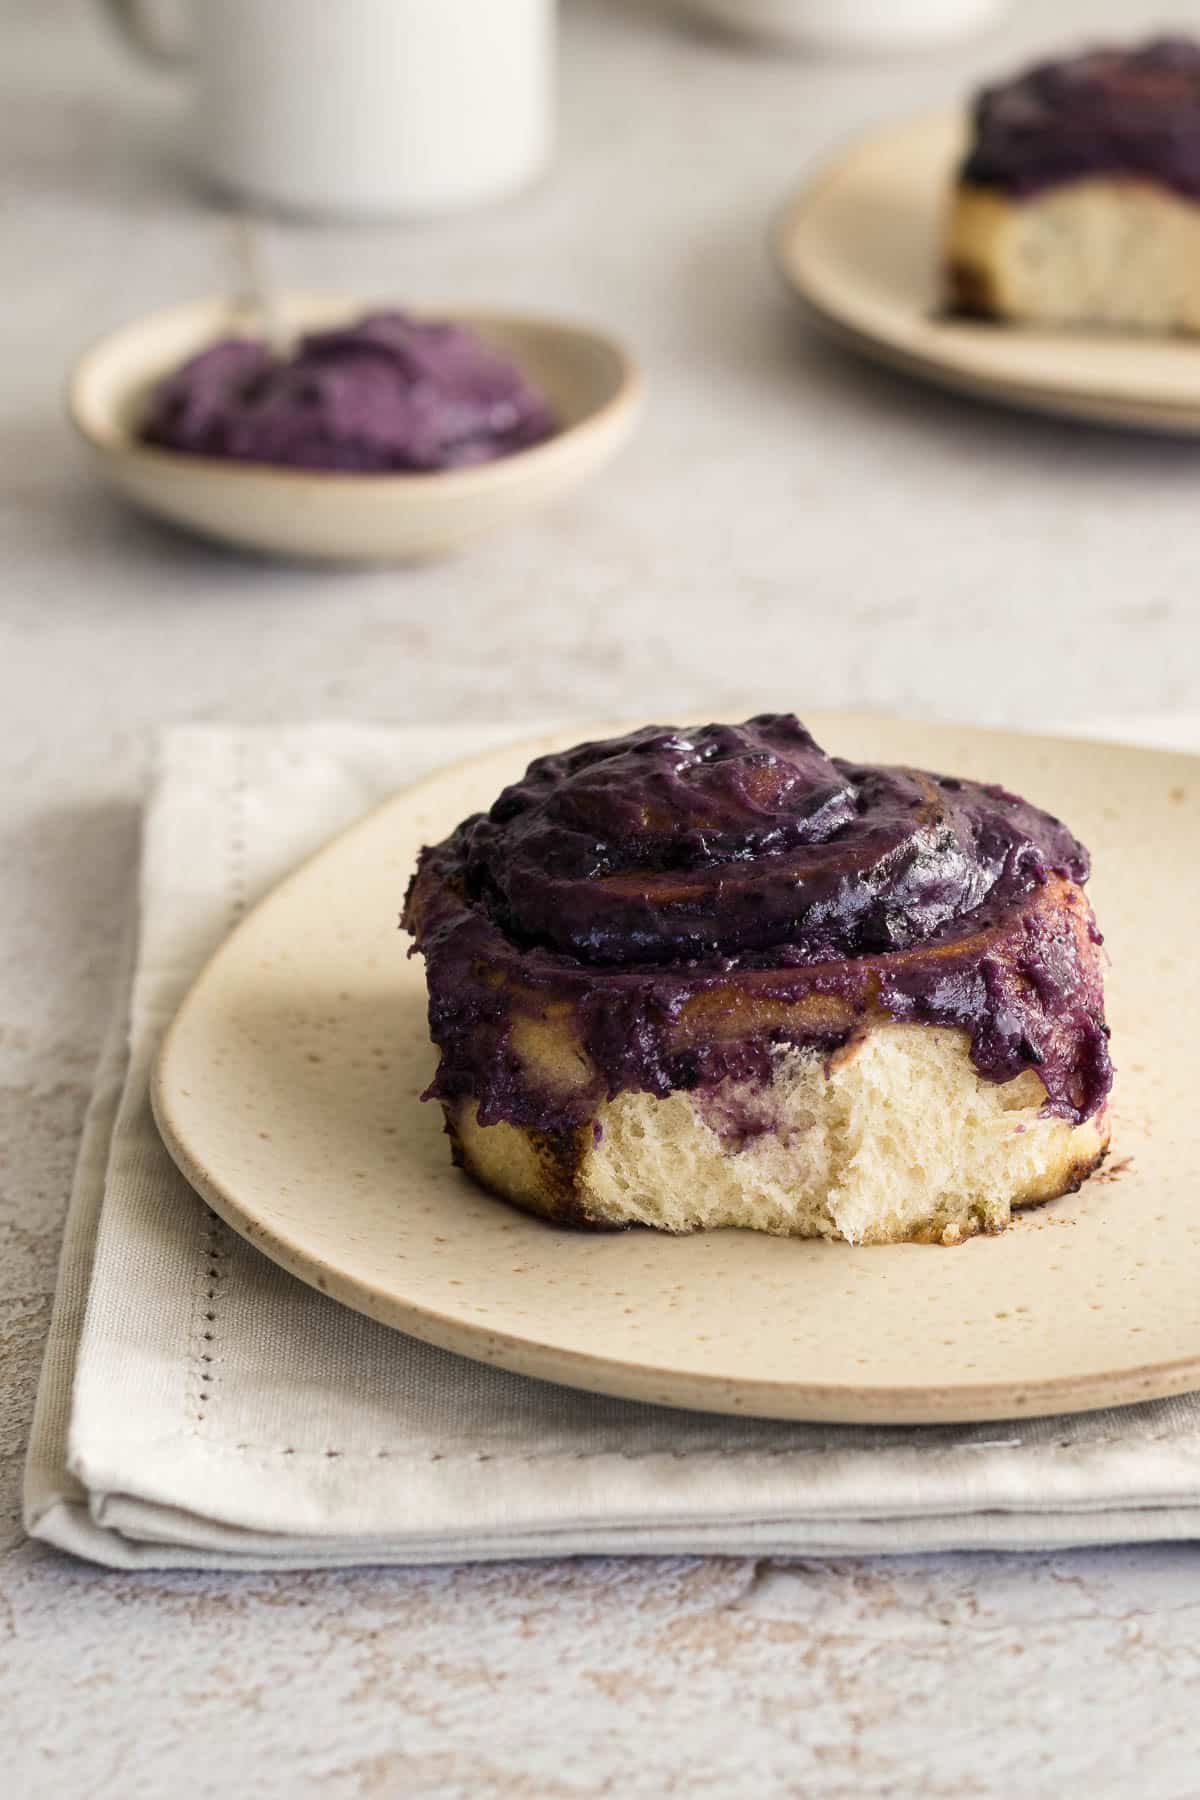 Cinnamon blueberry rolls on a plate topped with a blueberry cream cheese frosting.